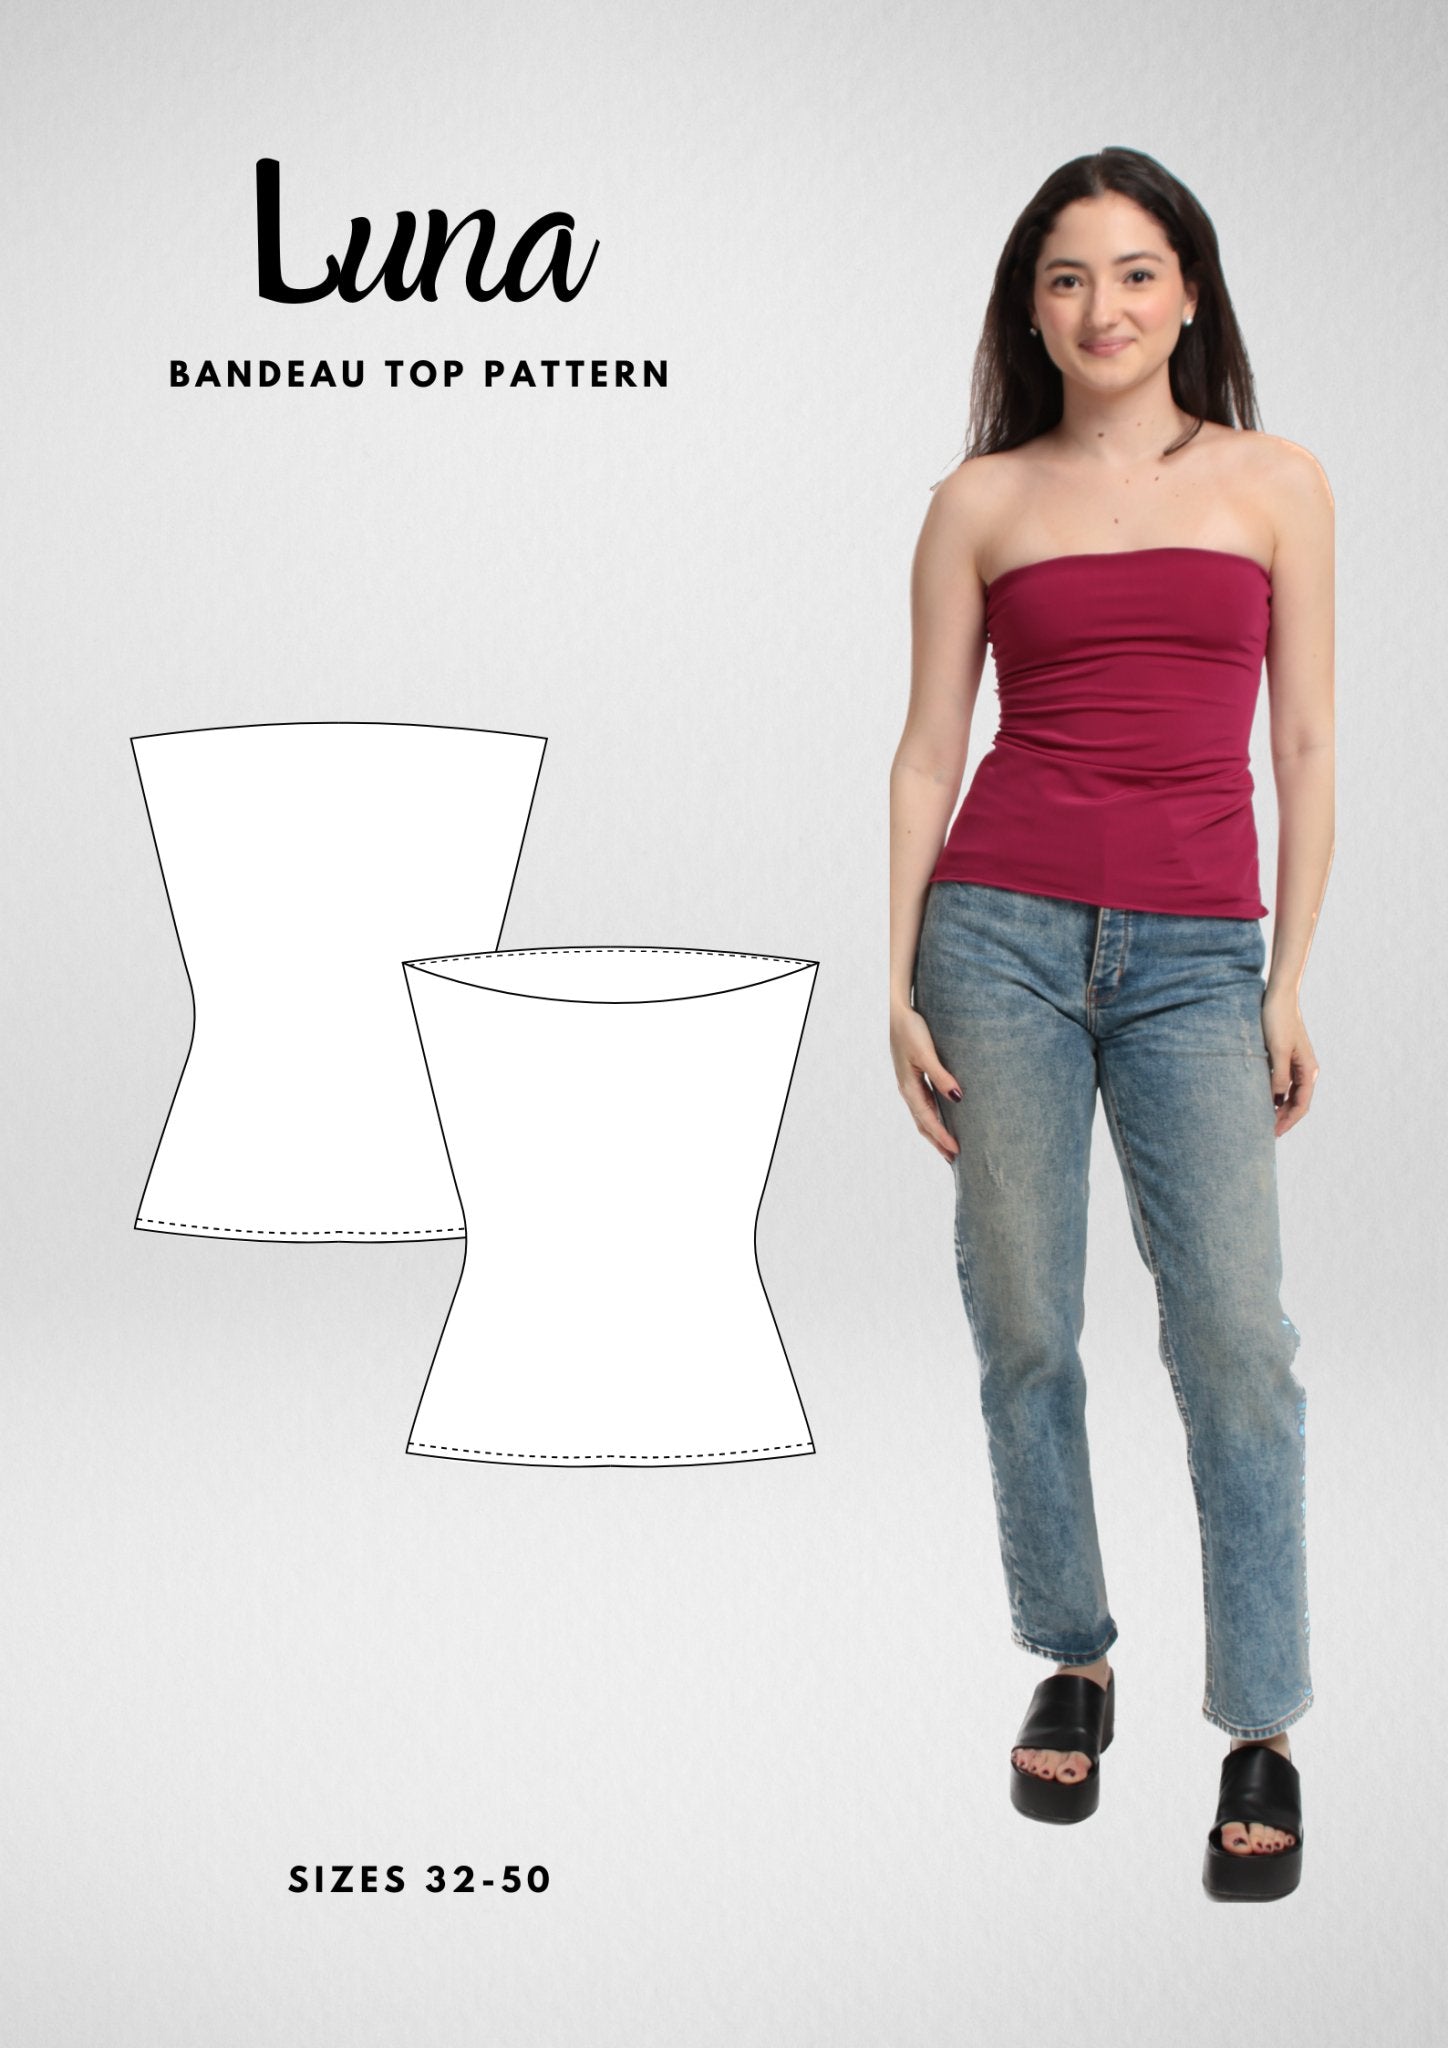 Strapless Bandeau Tube Top Sewing Pattern [Luna]